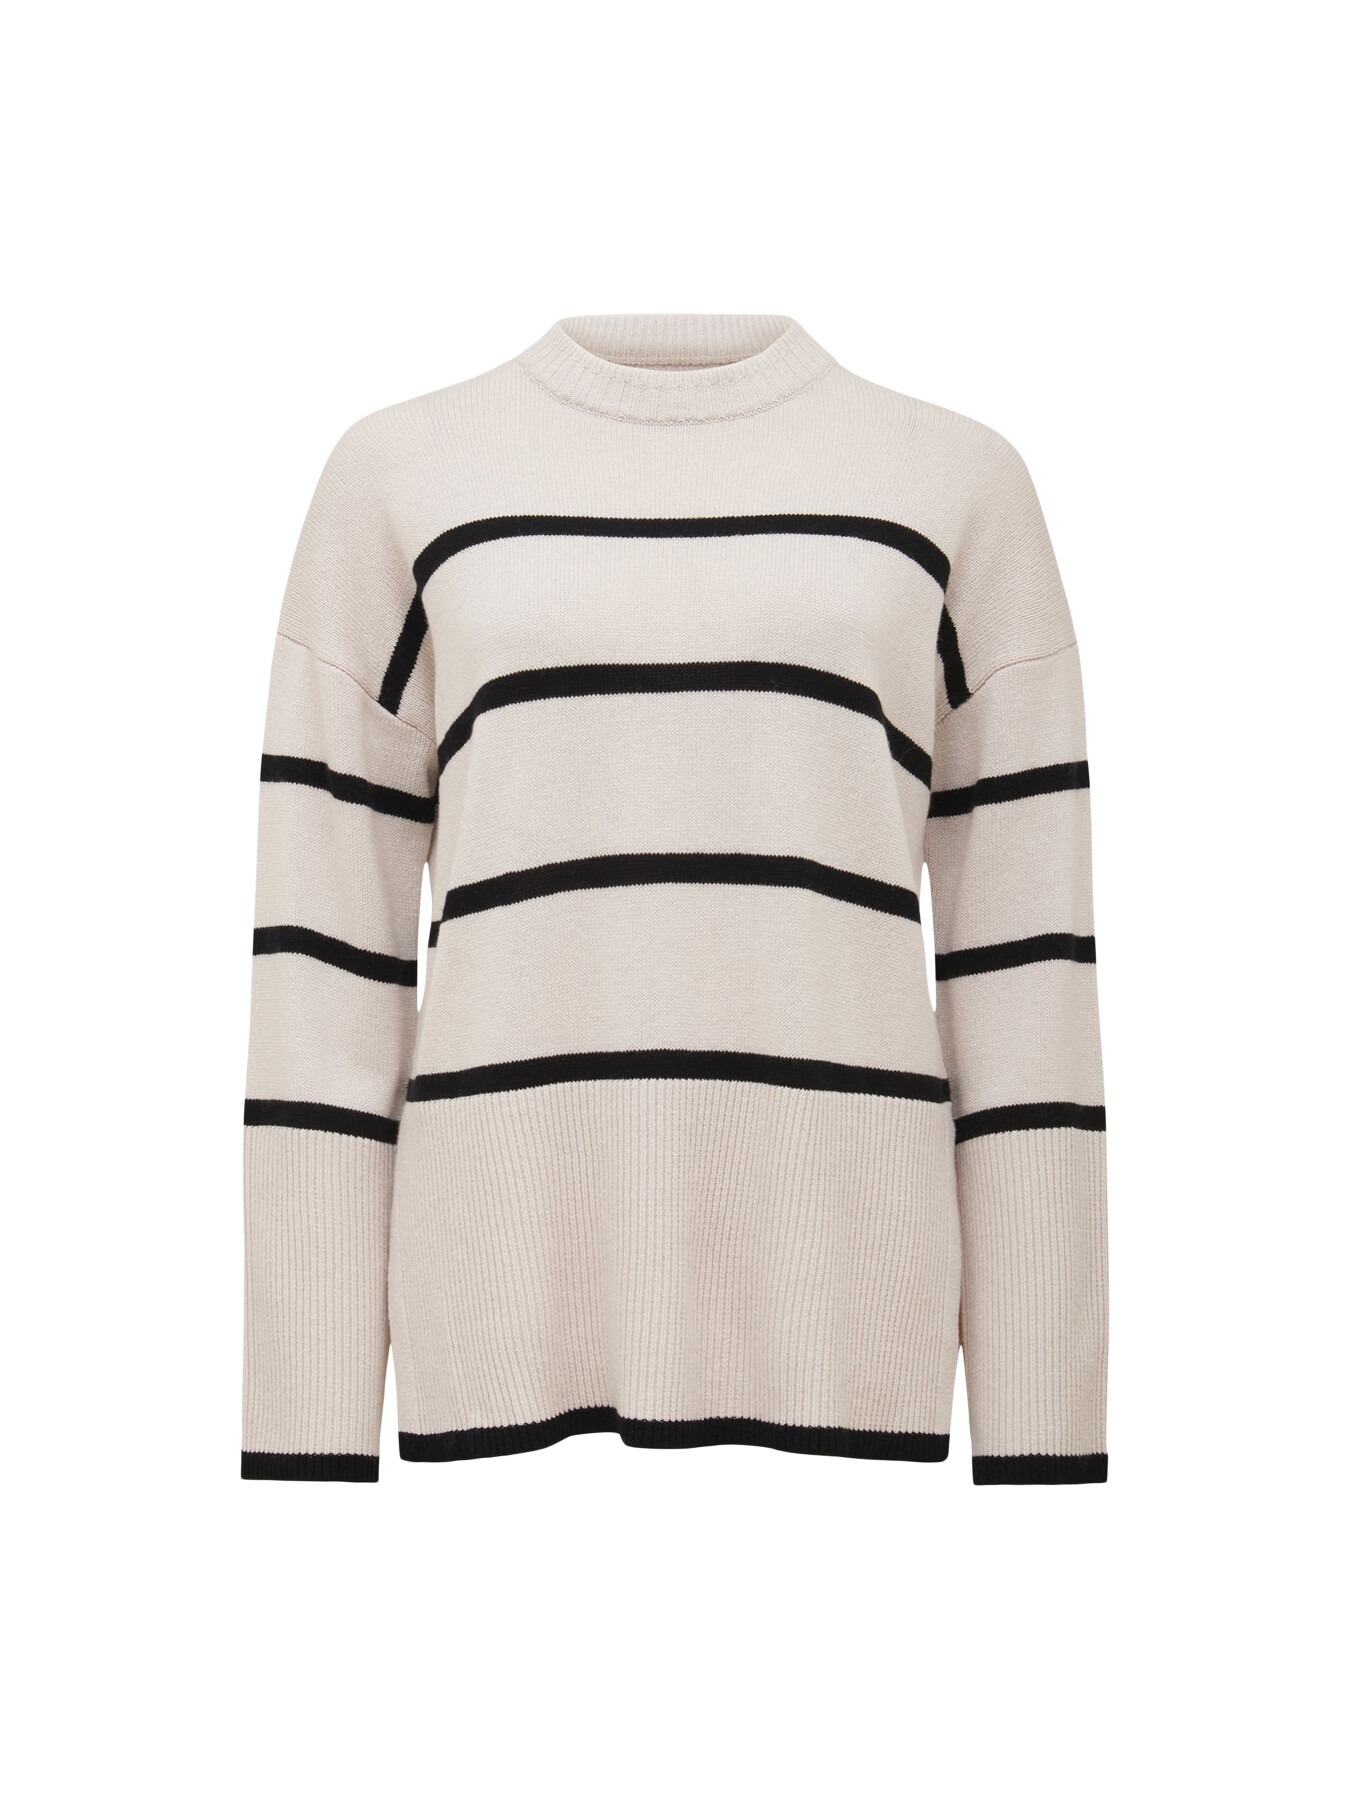 Forever New Bianca Relaxed Longline Crew Neck Jumper | Jumpers | Fenwick